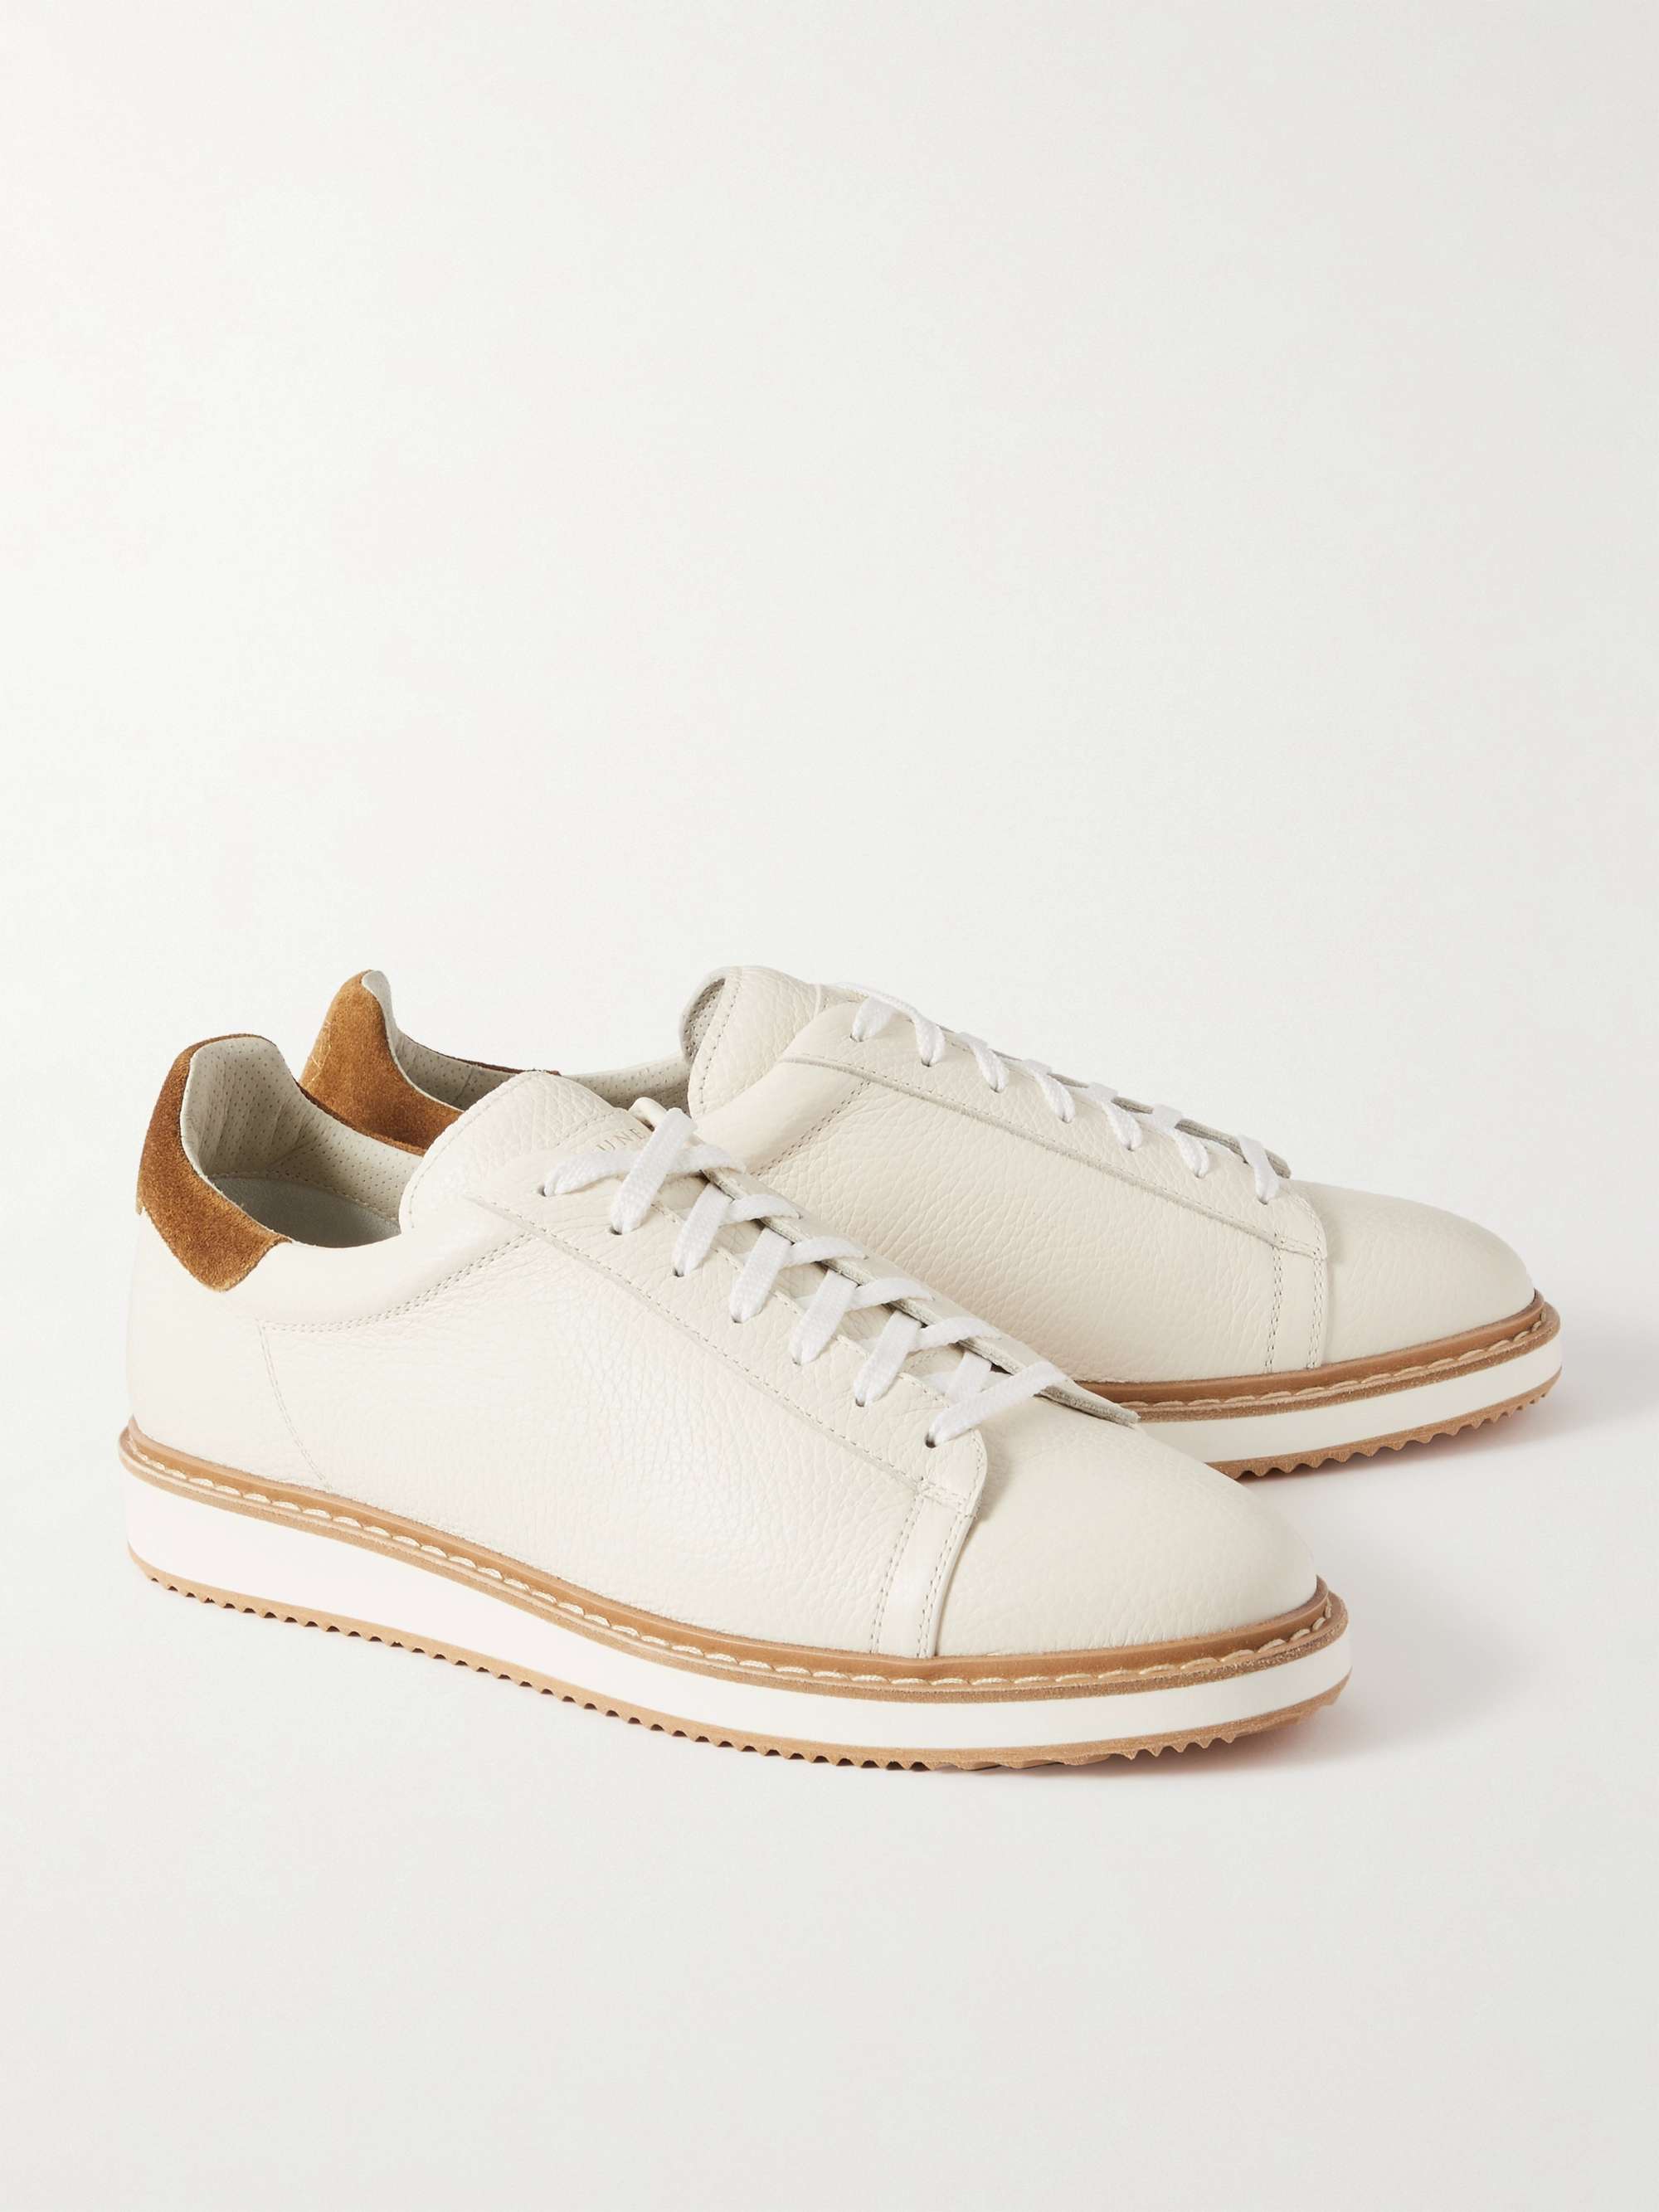 BRUNELLO CUCINELLI Full-Grain Suede-Trimmed Leather Sneakers